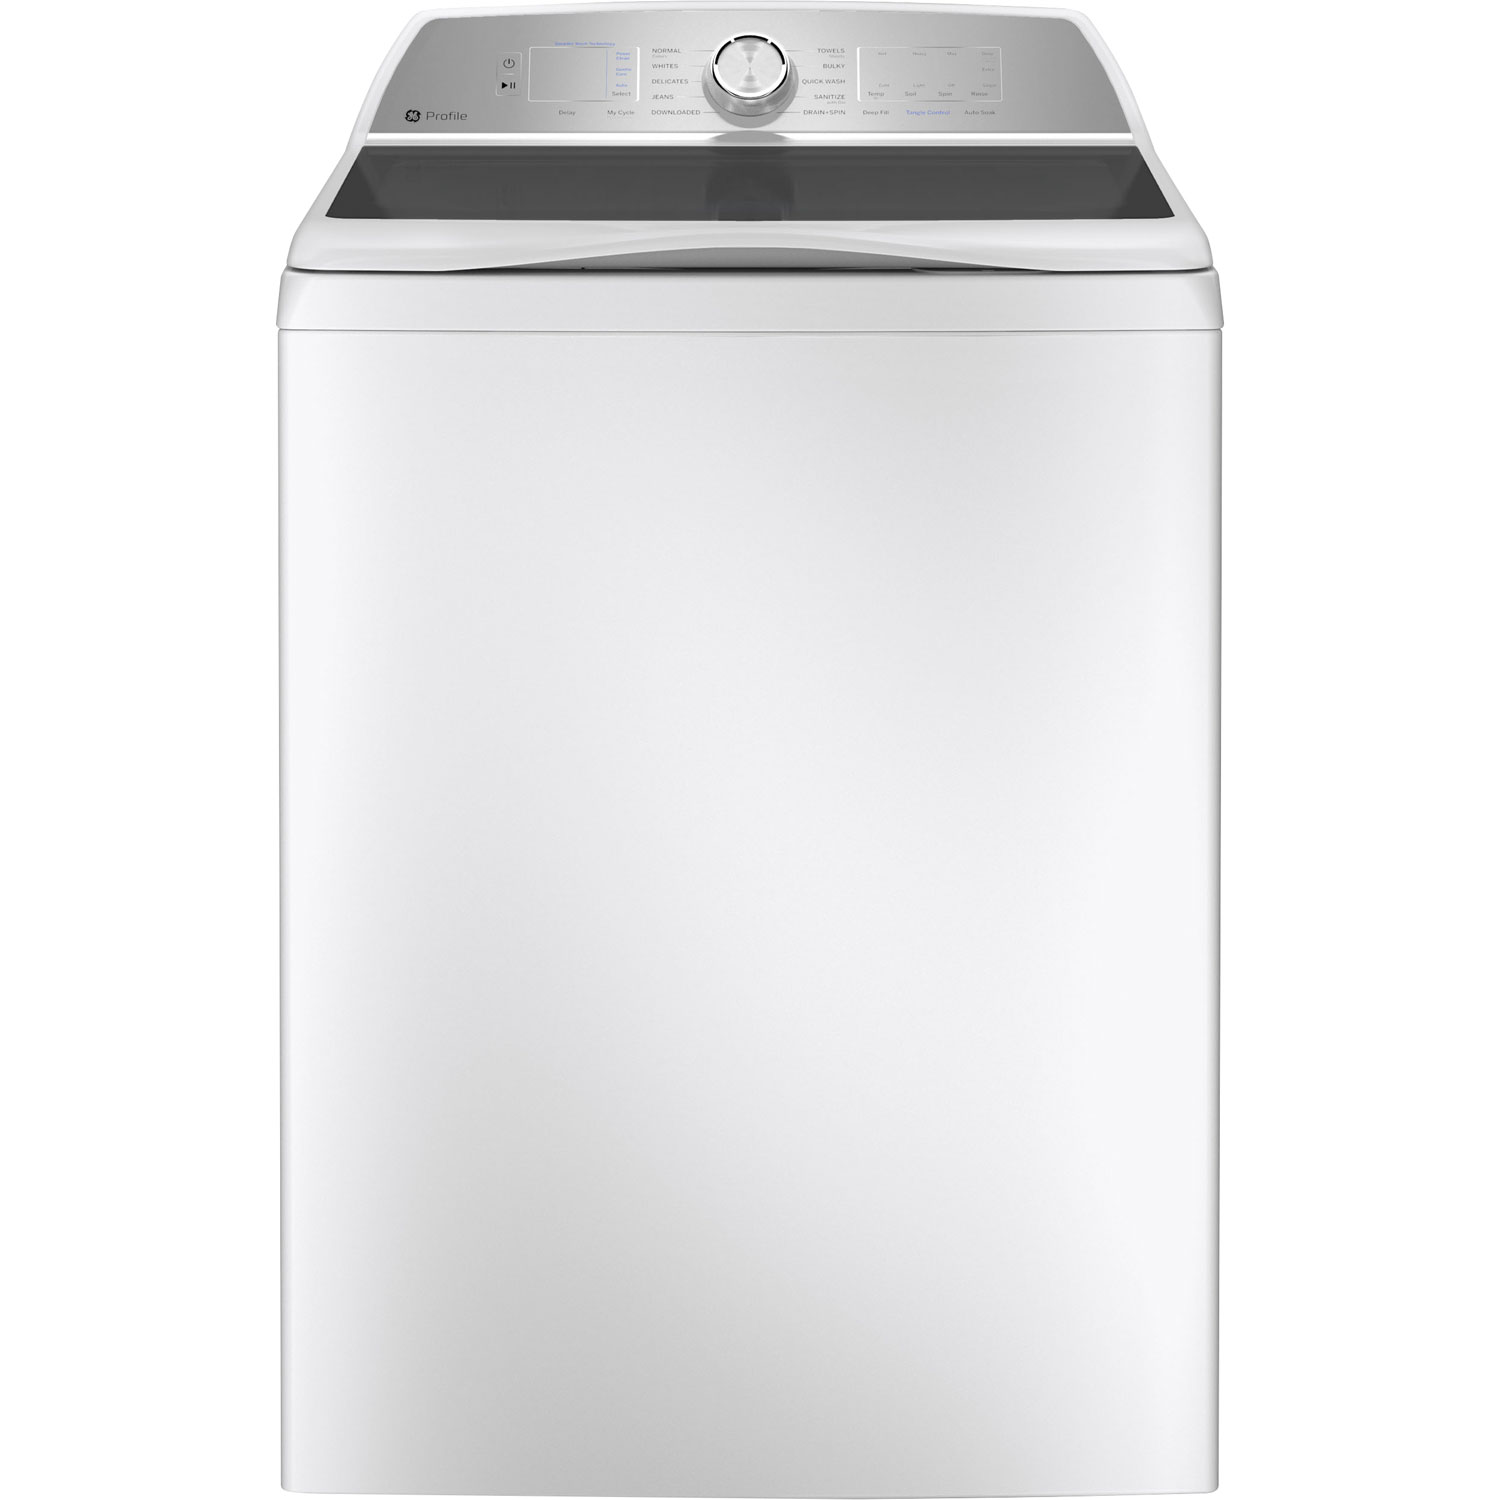 GE Profile 5.8 Cu. Ft. High Efficiency Top Load Washer (PTW600BSRWS) - White